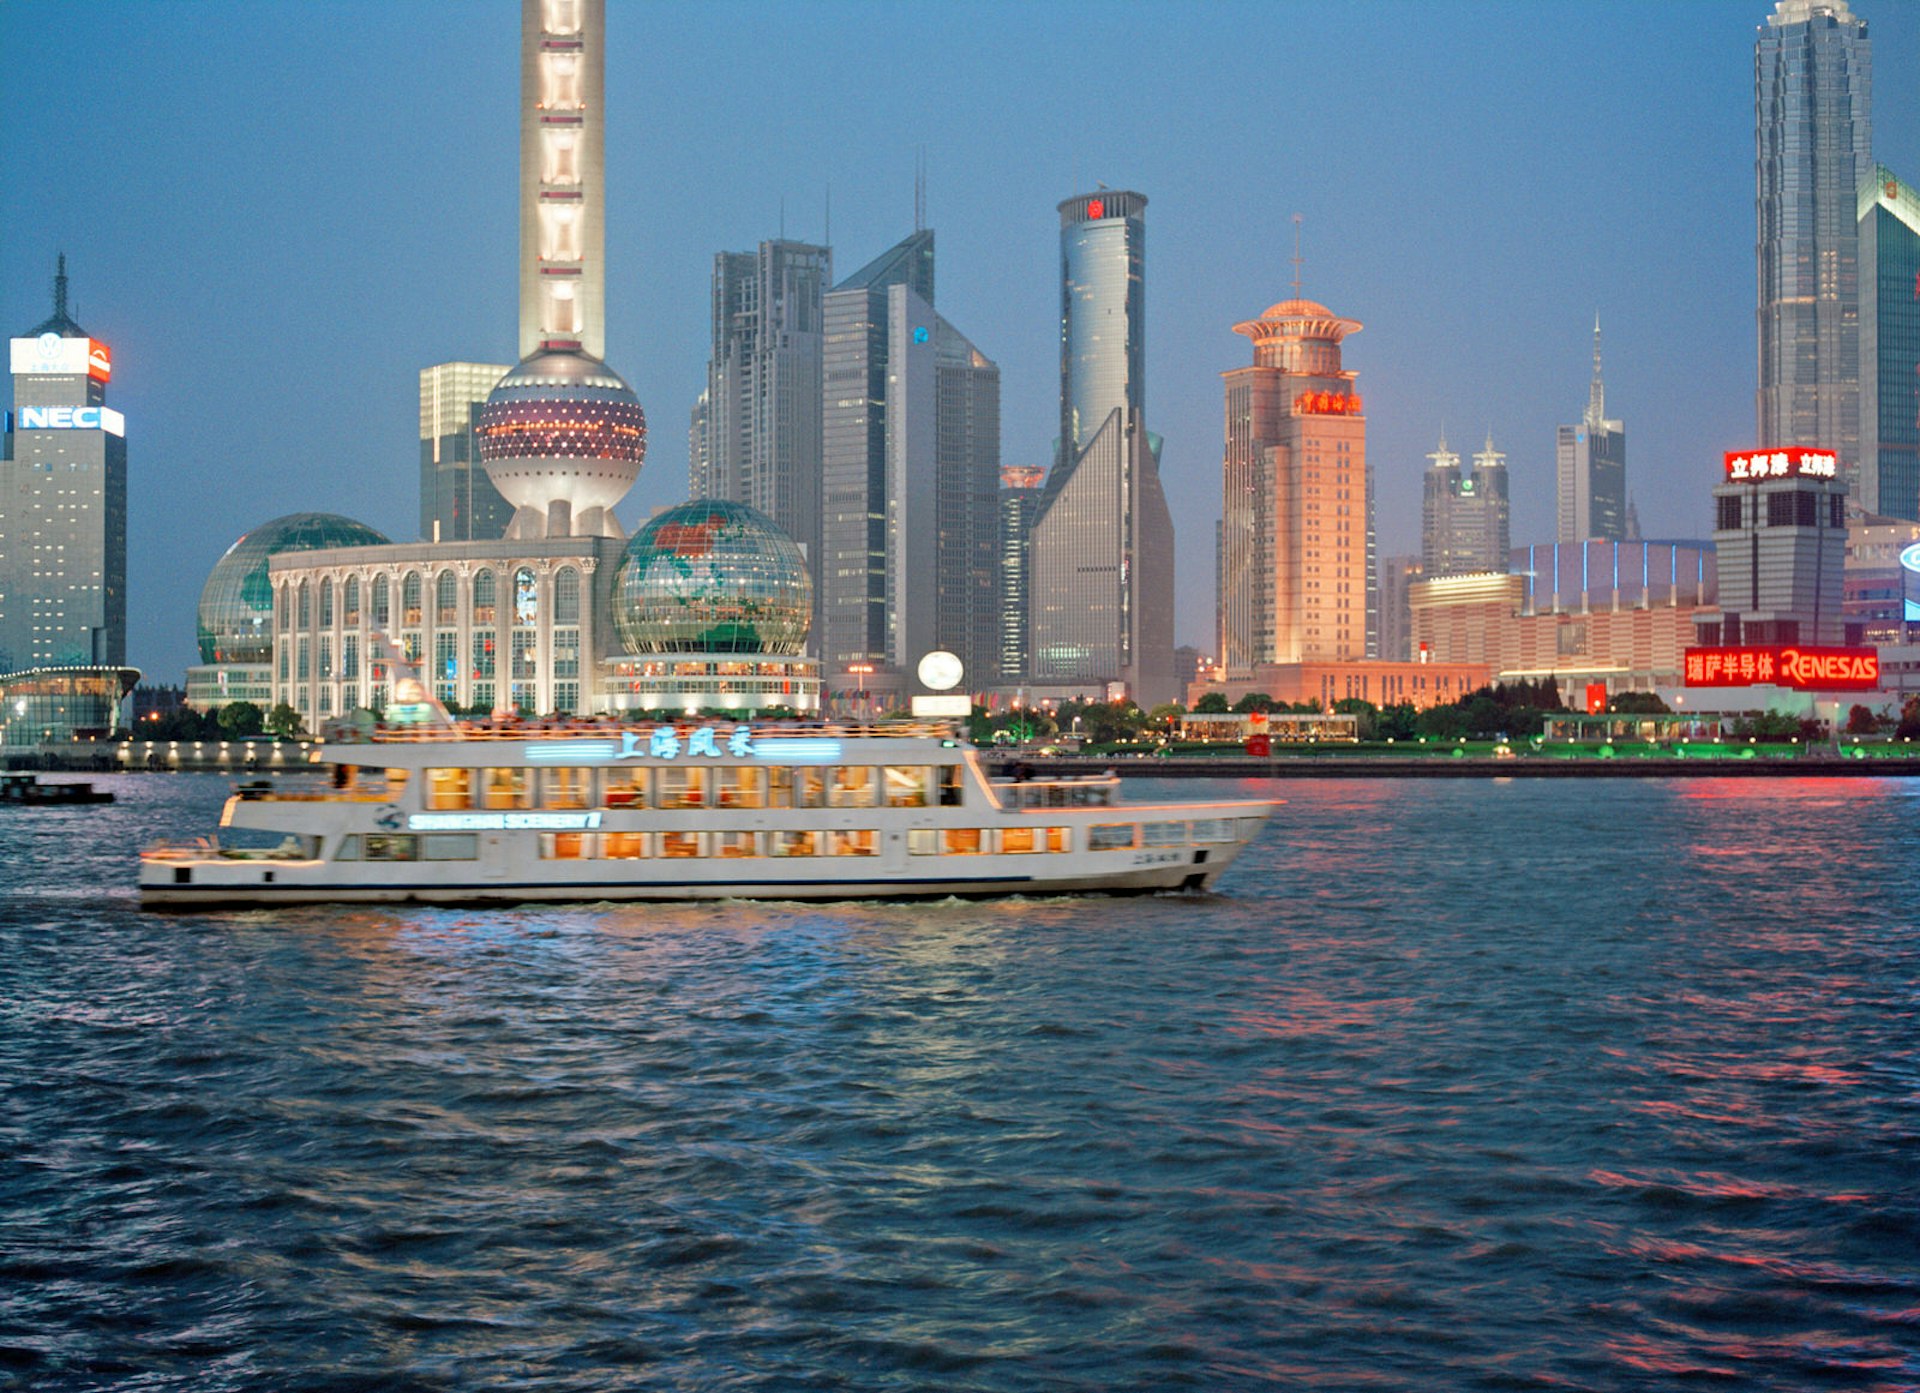 Tour the Huangpu River for next-to-nothing on the Shanghai Ferry © xPACIFICA / Getty